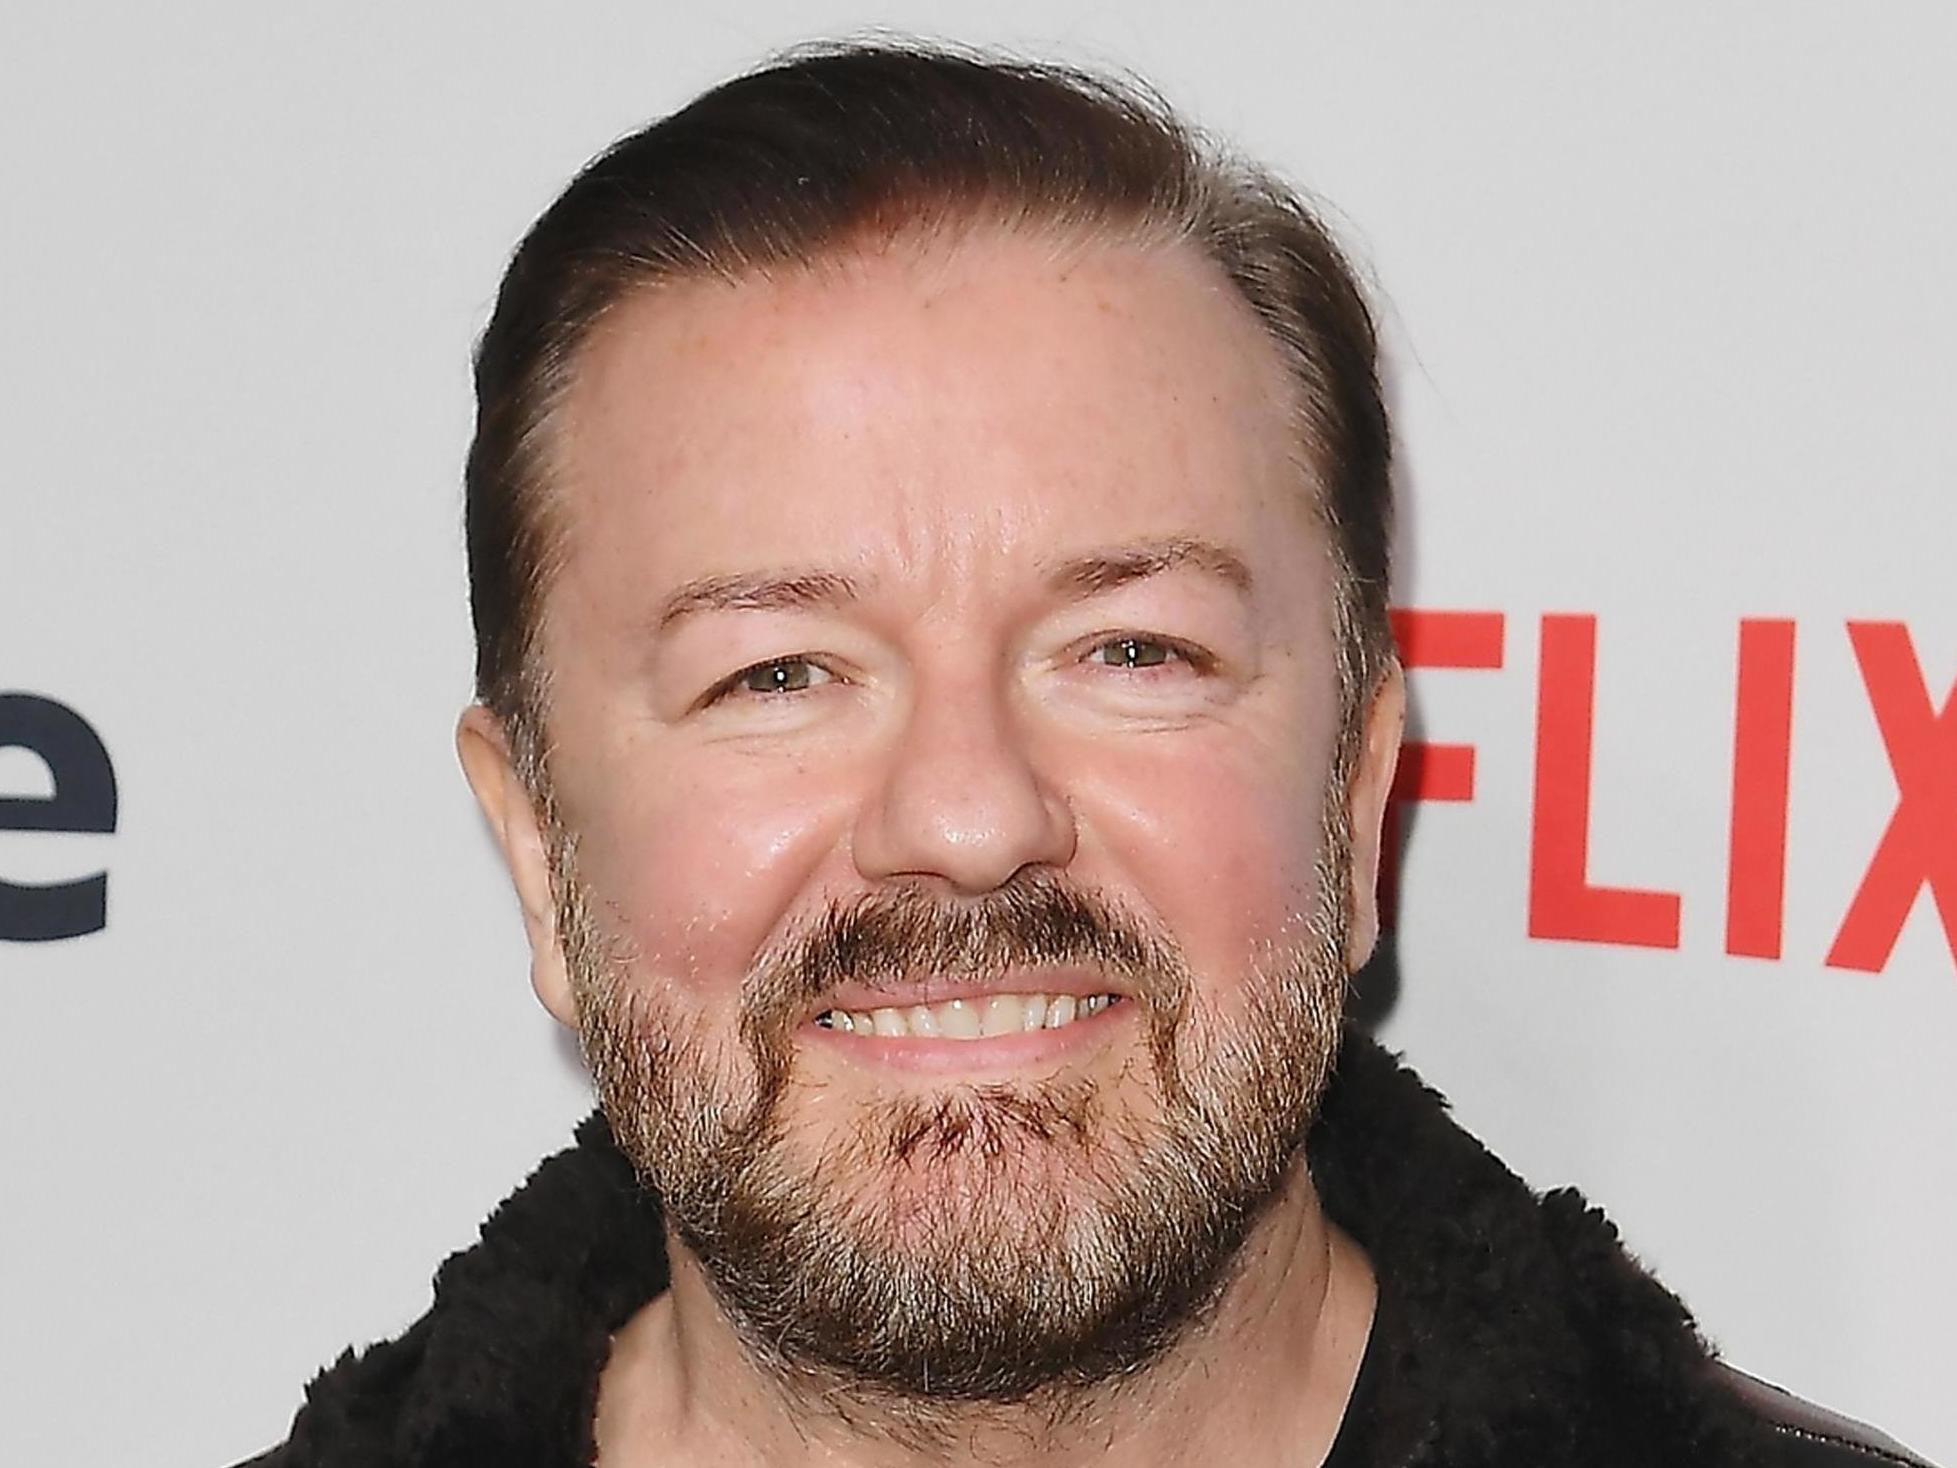 What do celebs think of ricky gervais